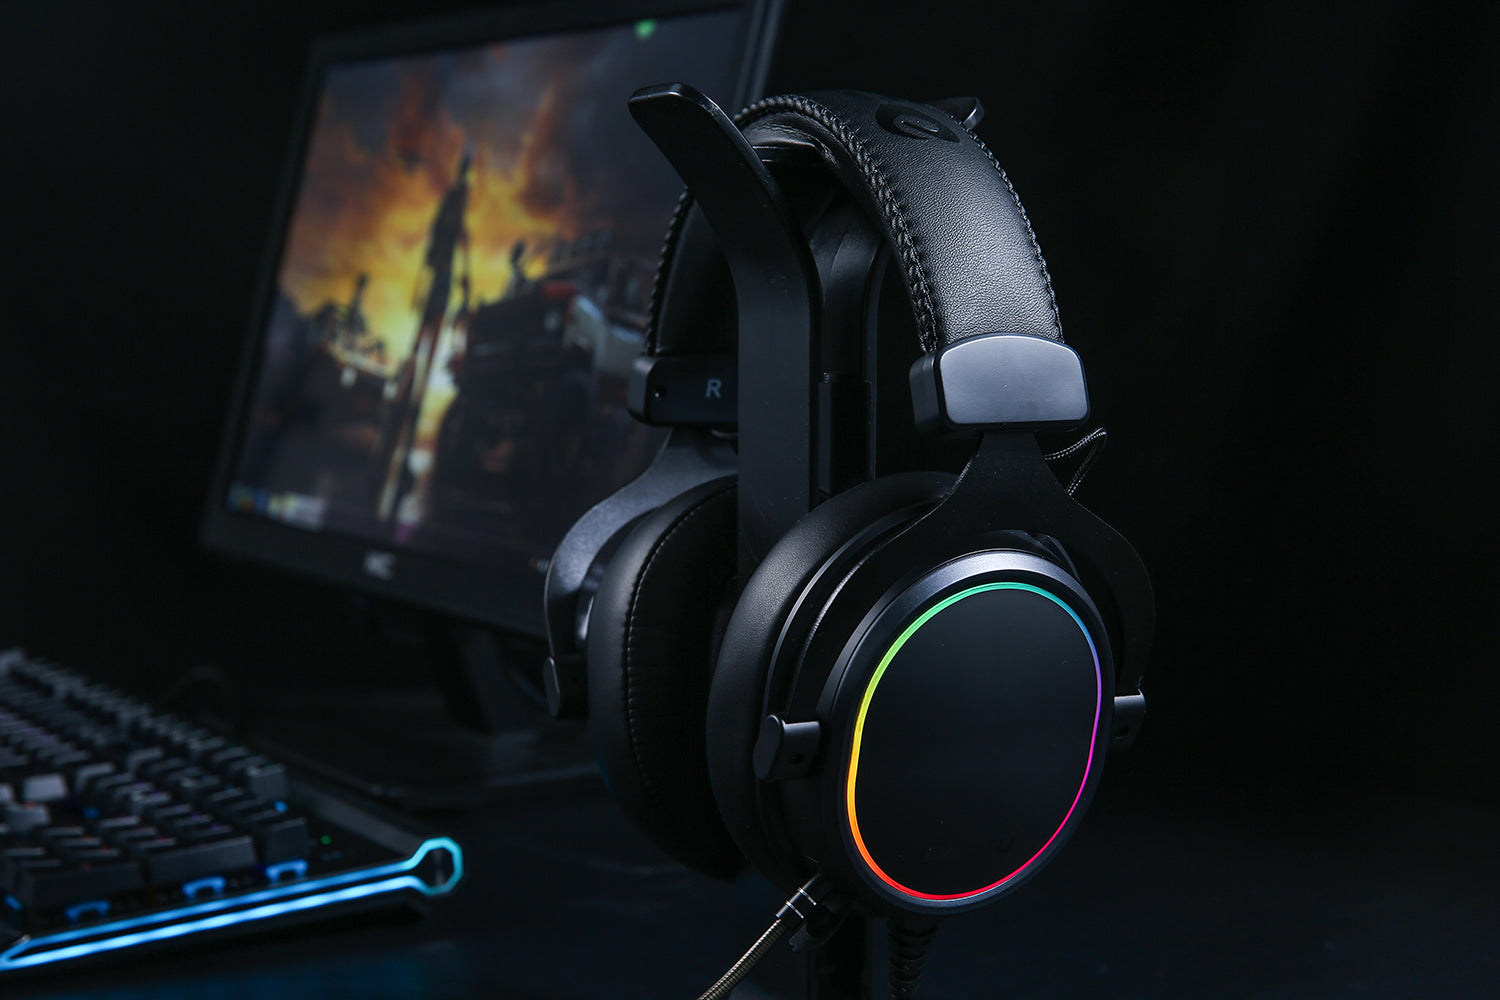 DAREU EH925 Flowing RGB Backlit Powerful Gaming Headset with 7.1 Surround Sound and Noise Reduction Mic